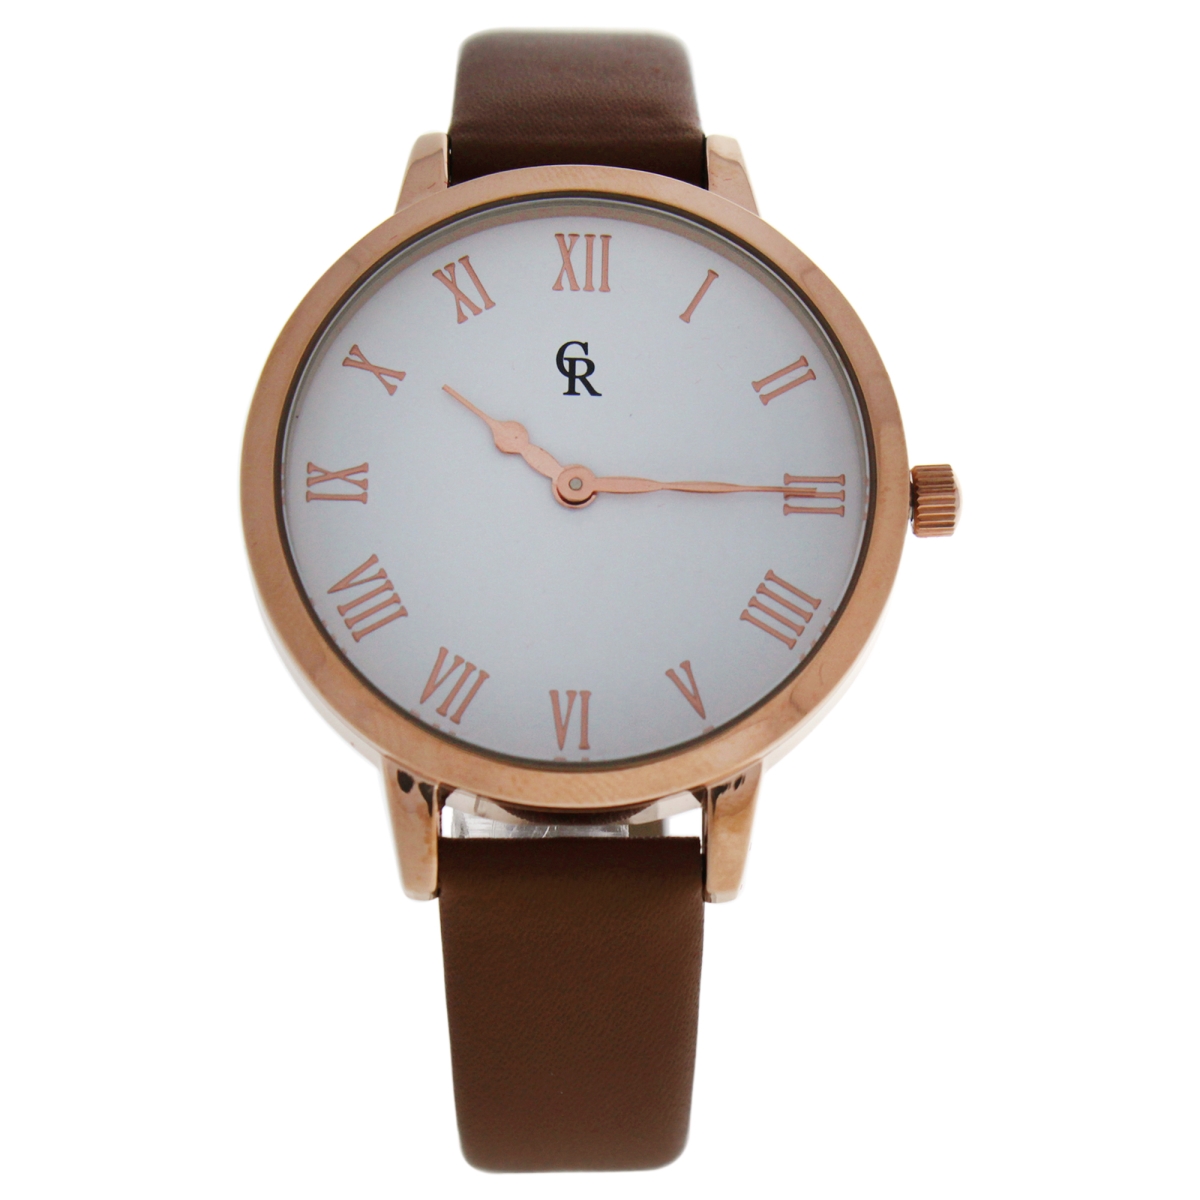 W-wat-1506 La Basic - Rose Gold & Brown Leather Strap Watch For Women - Crb003